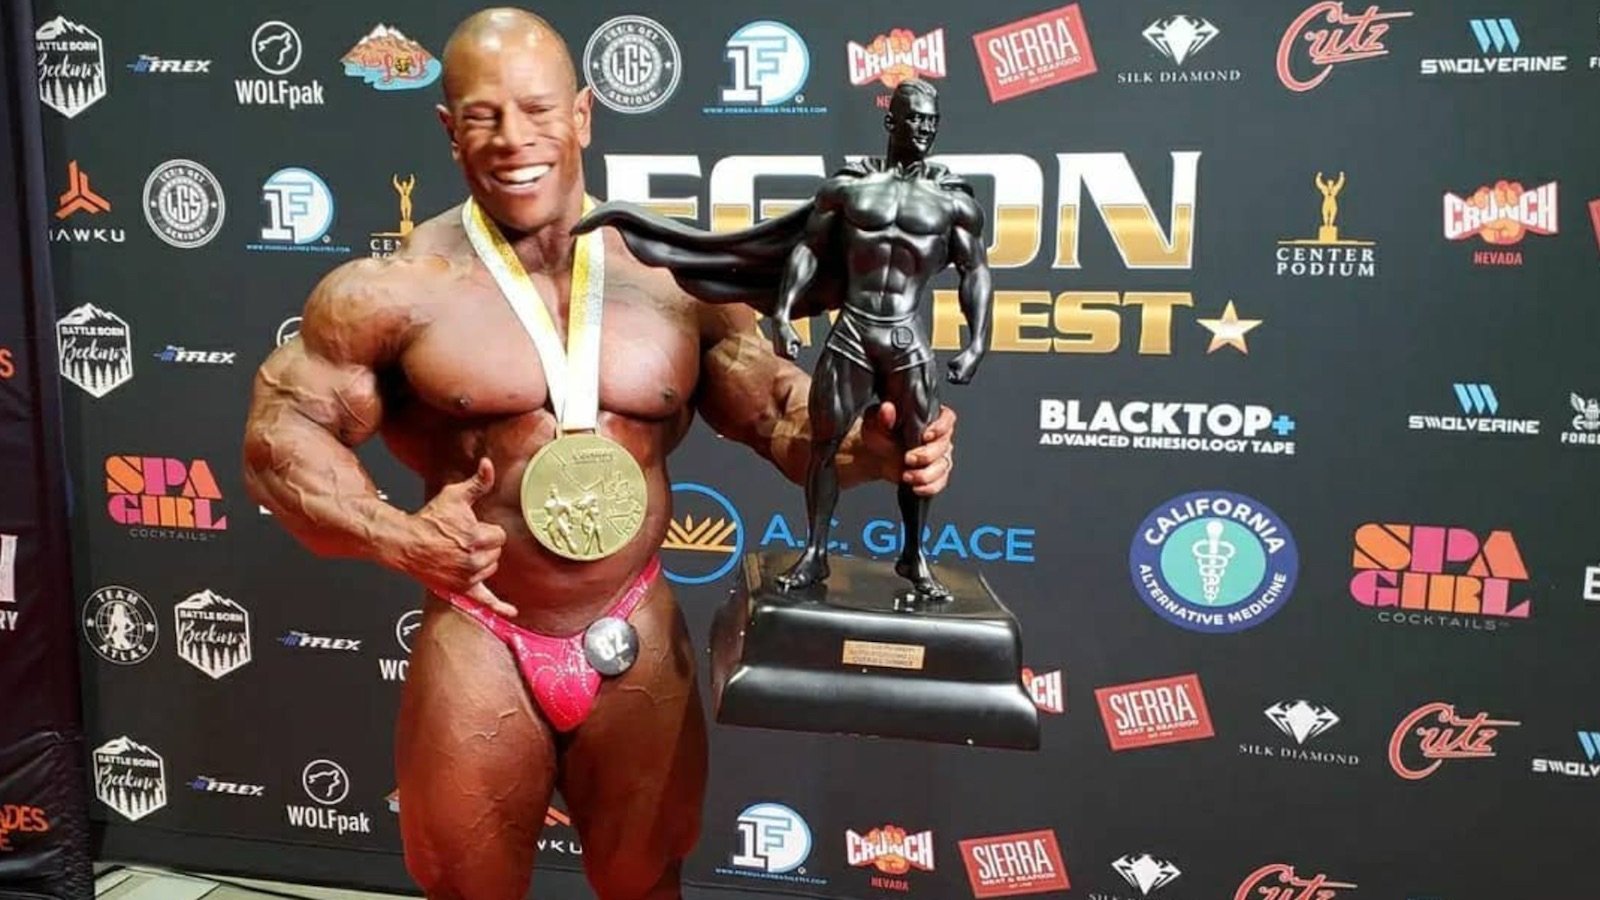 david-henry-looks-to-achieve-another-olympia-milestone-at-the-2023-masters-olympia-contest-–-breaking-muscle